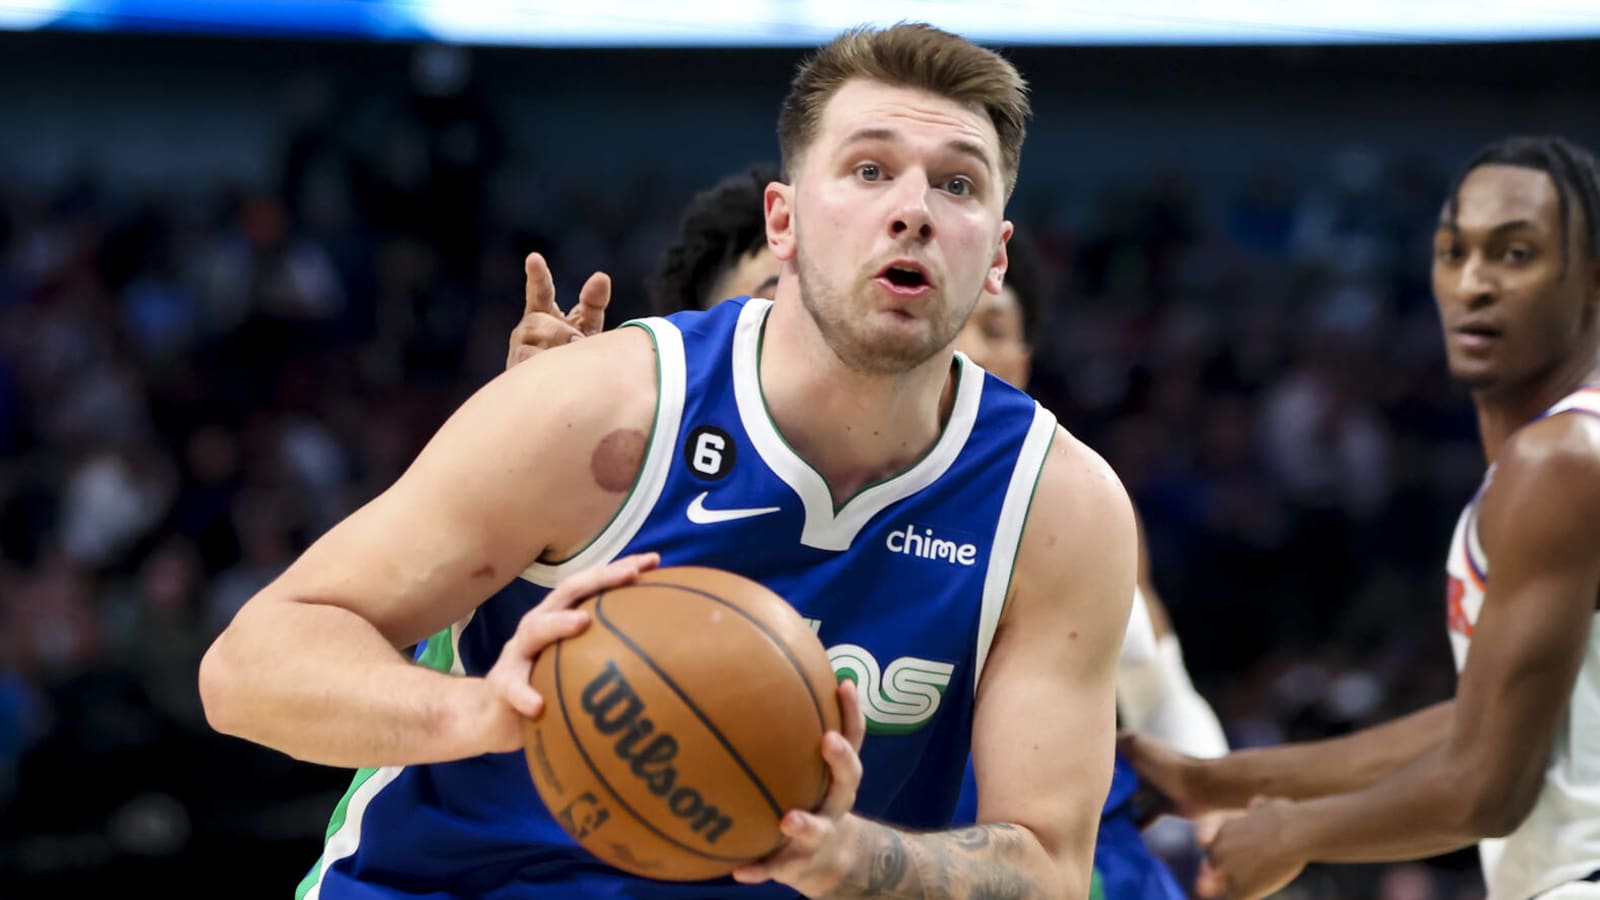 Luka Doncic should be favored over this player for MVP